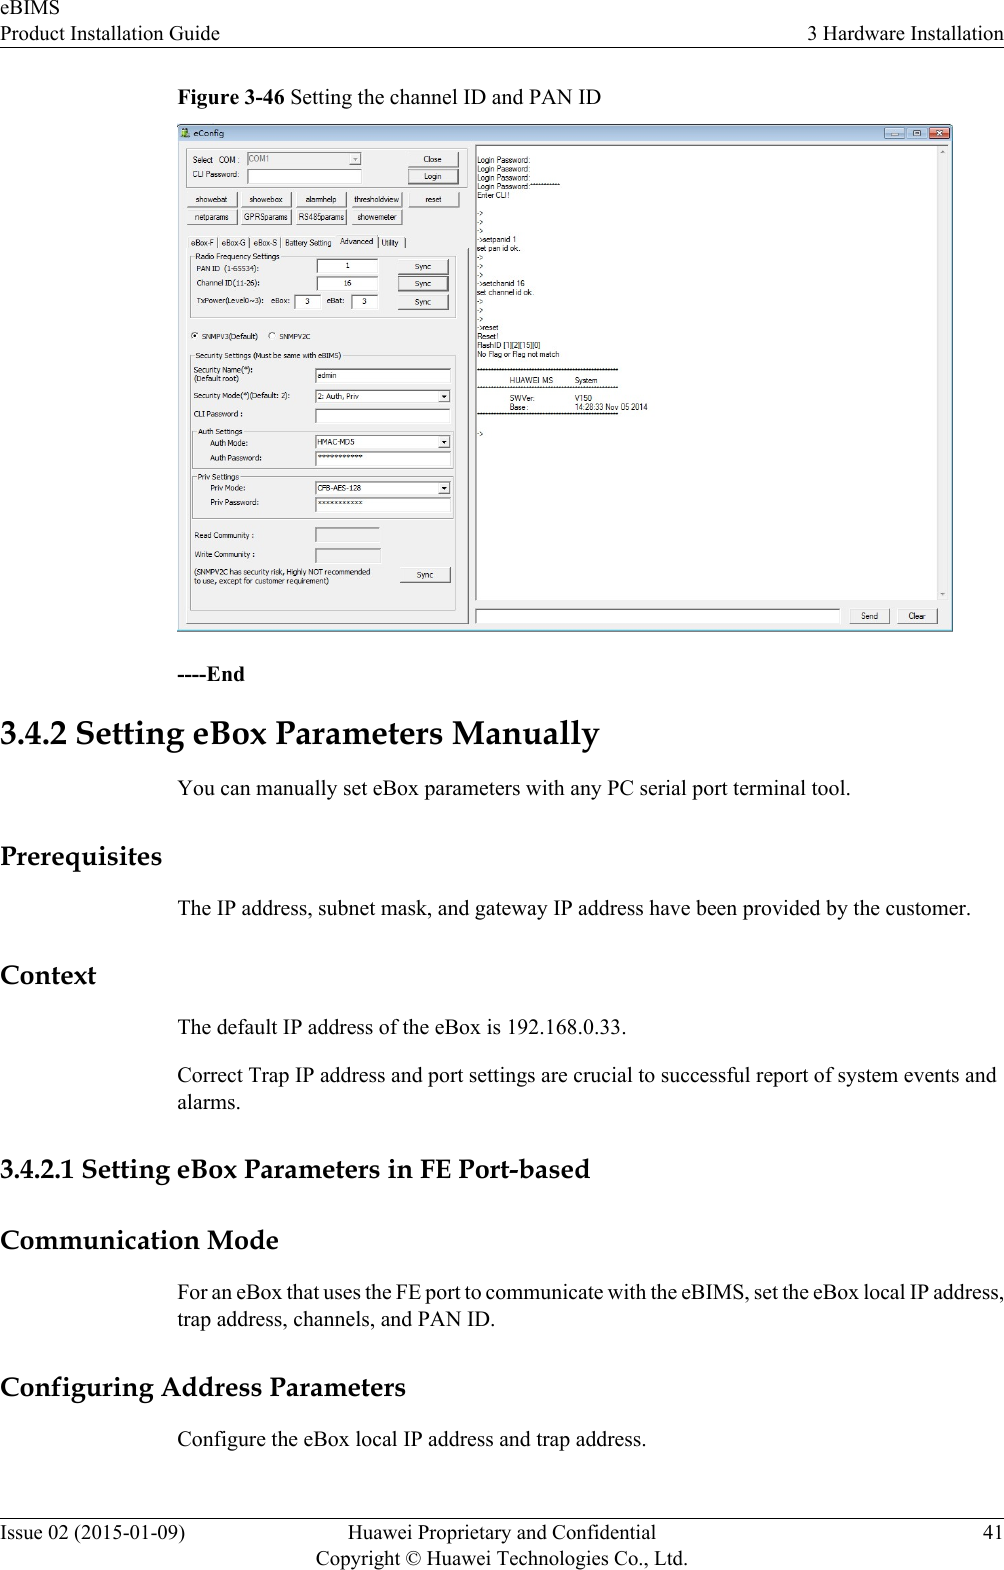 Figure 3-46 Setting the channel ID and PAN ID----End3.4.2 Setting eBox Parameters ManuallyYou can manually set eBox parameters with any PC serial port terminal tool.PrerequisitesThe IP address, subnet mask, and gateway IP address have been provided by the customer.ContextThe default IP address of the eBox is 192.168.0.33.Correct Trap IP address and port settings are crucial to successful report of system events andalarms.3.4.2.1 Setting eBox Parameters in FE Port-basedCommunication ModeFor an eBox that uses the FE port to communicate with the eBIMS, set the eBox local IP address,trap address, channels, and PAN ID.Configuring Address ParametersConfigure the eBox local IP address and trap address.eBIMSProduct Installation Guide 3 Hardware InstallationIssue 02 (2015-01-09) Huawei Proprietary and ConfidentialCopyright © Huawei Technologies Co., Ltd.41